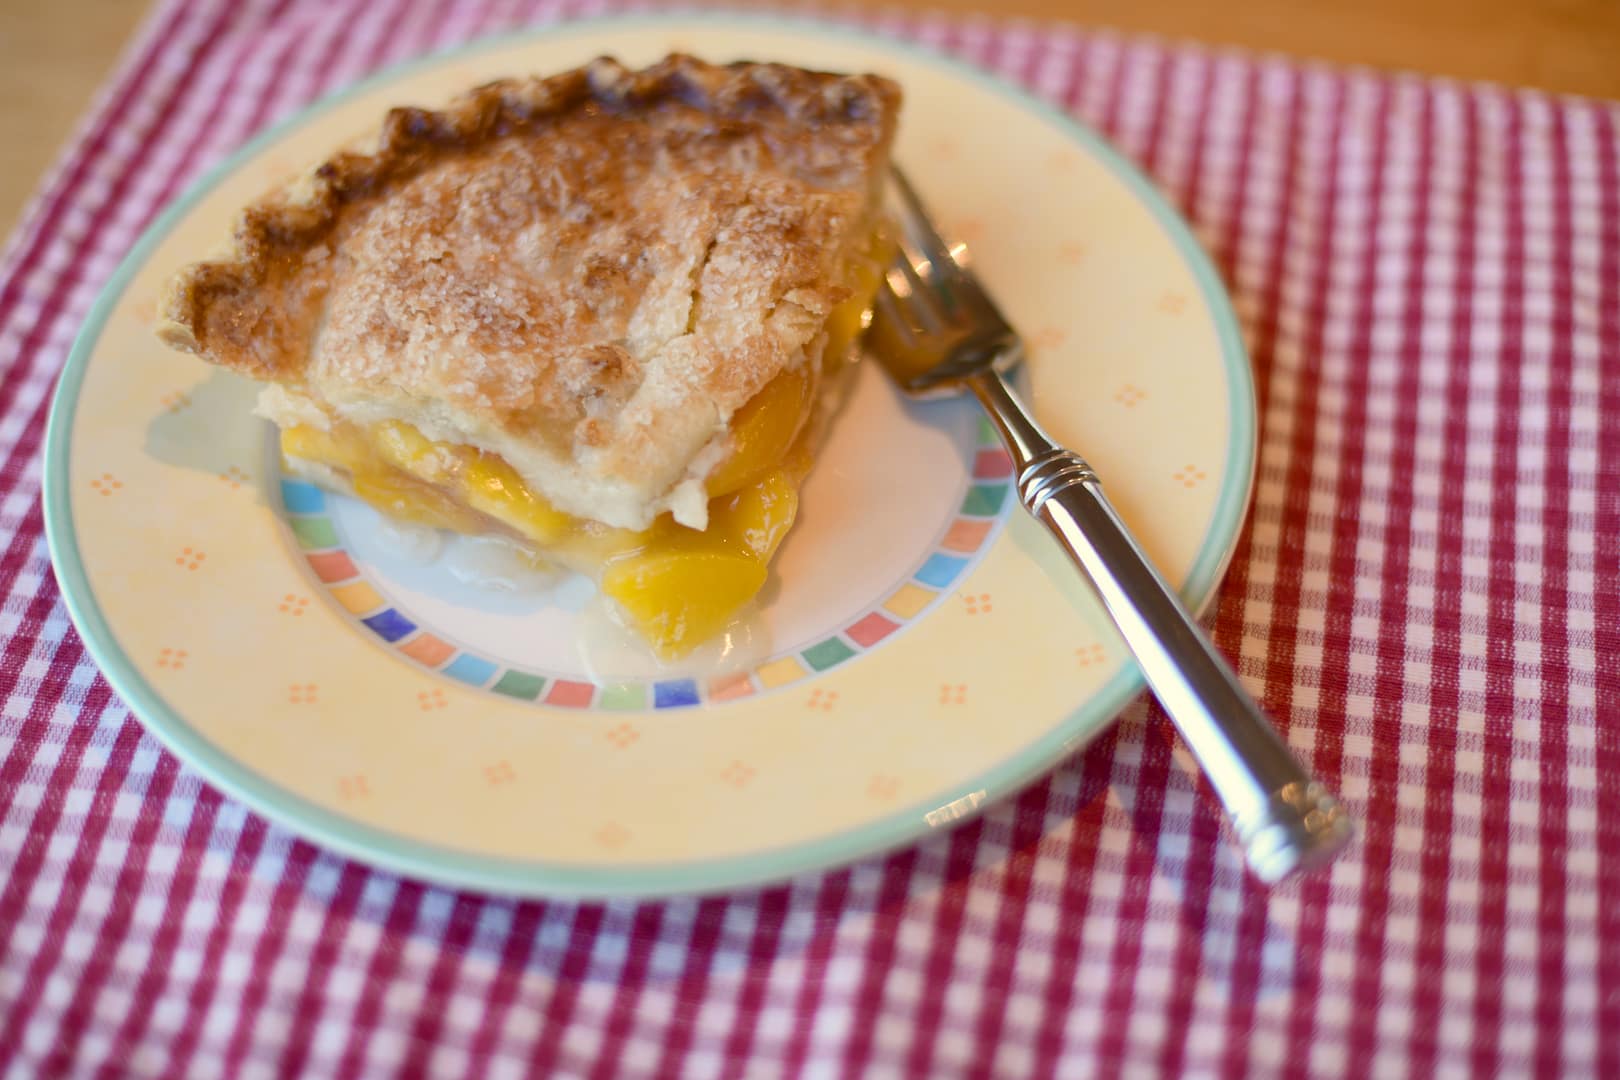 A piece of peach pie sits on a plate with a fork.